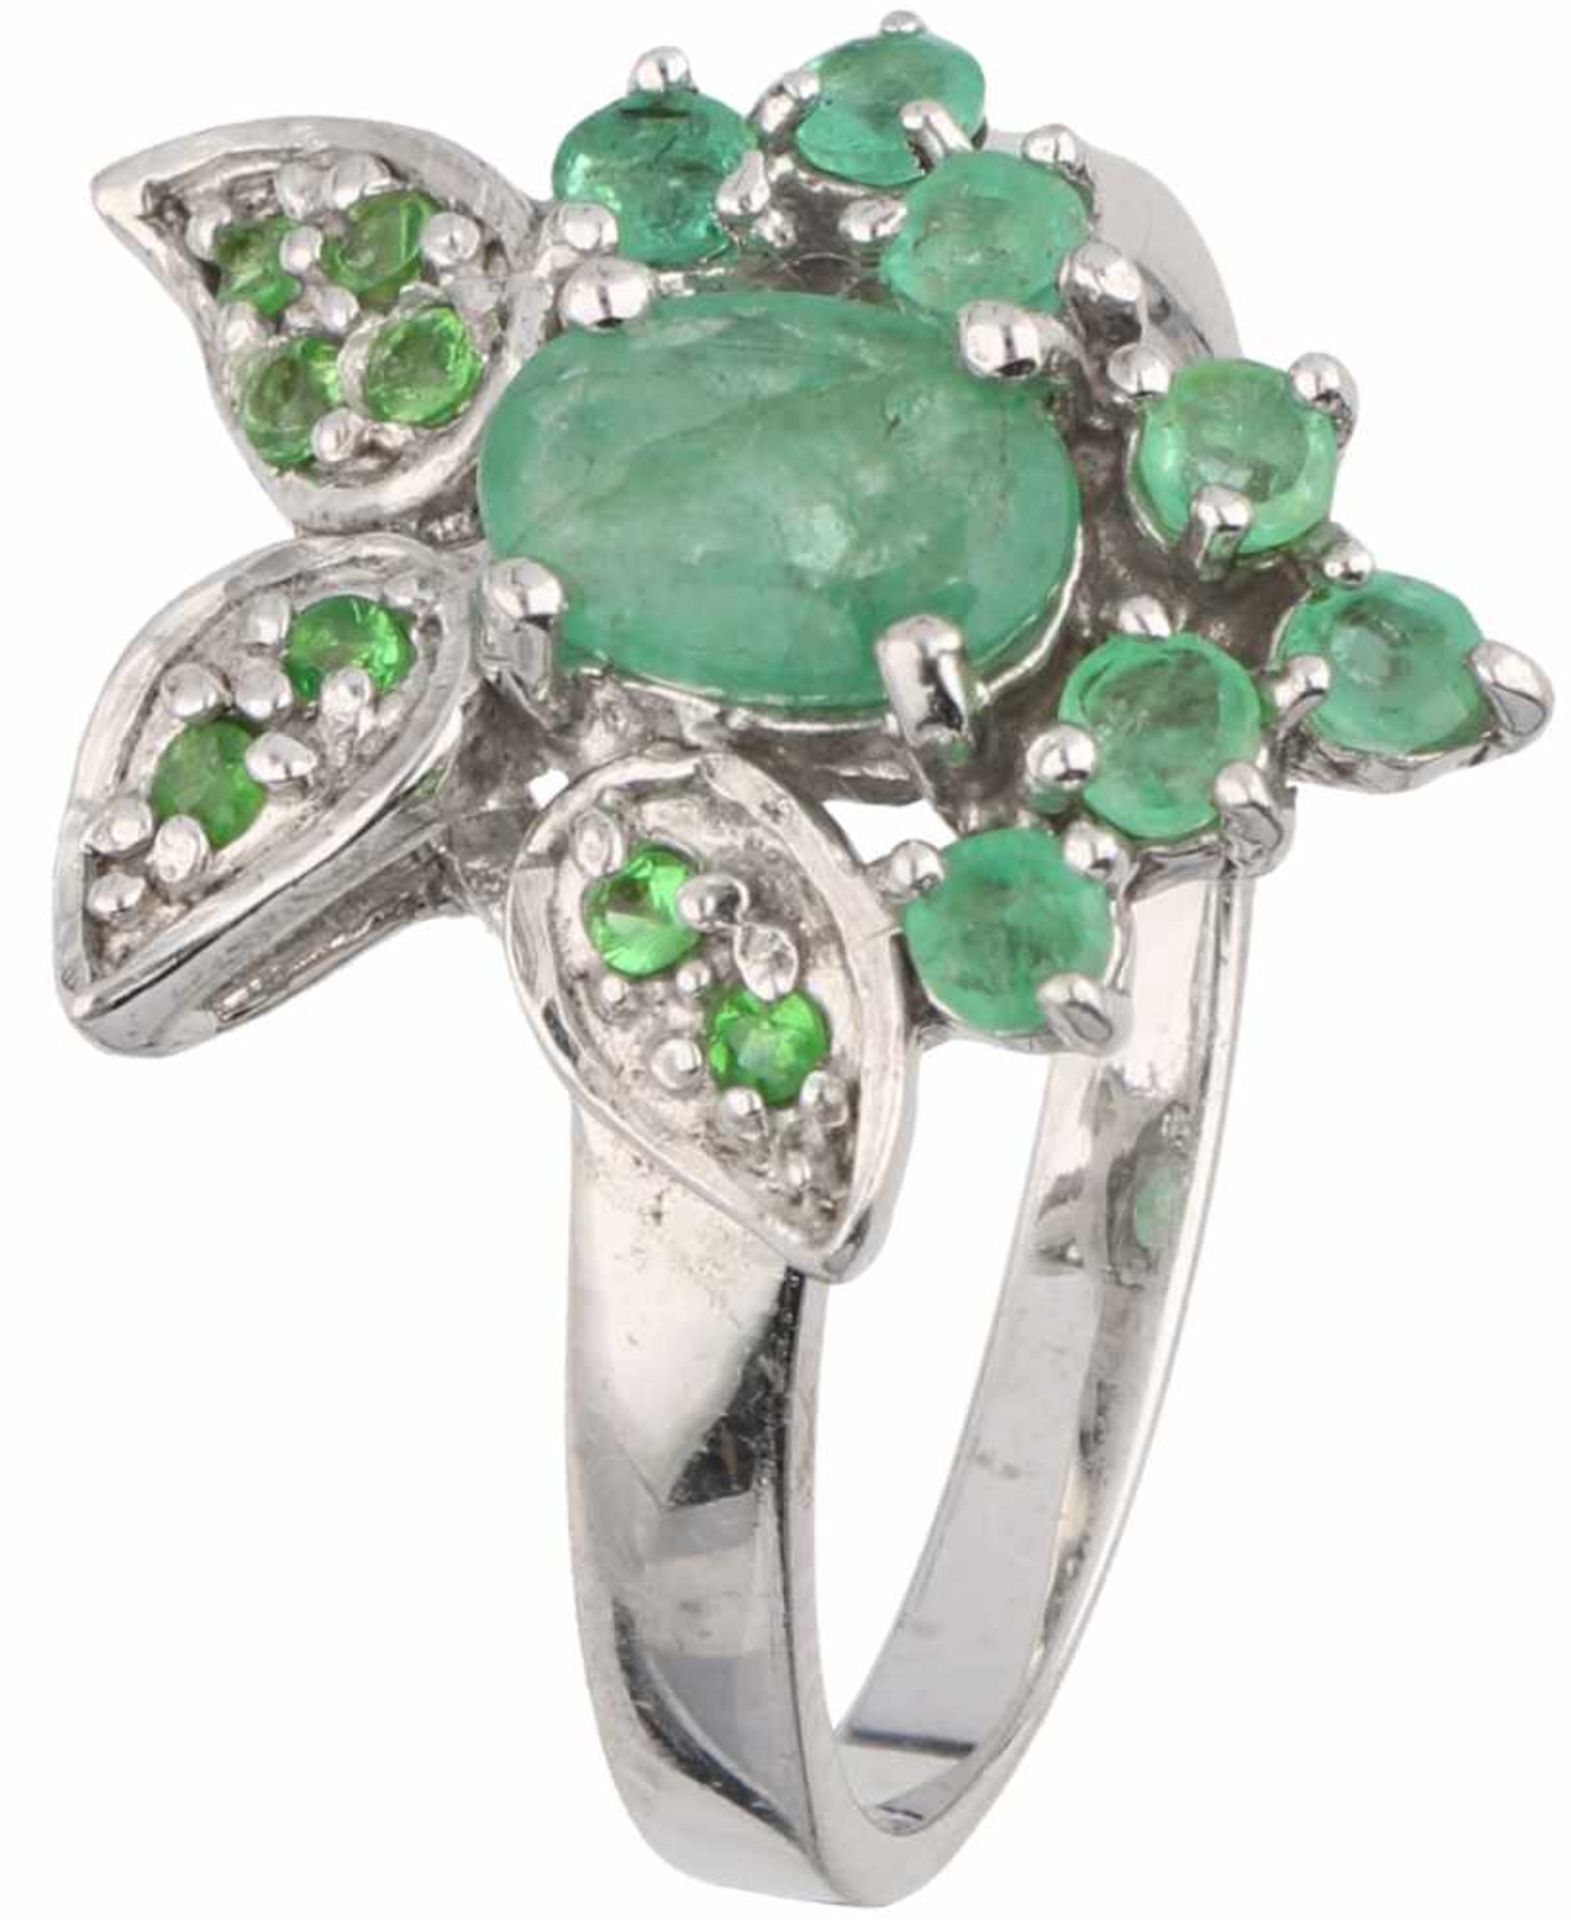 Ring silver, emerald - 925/1000.